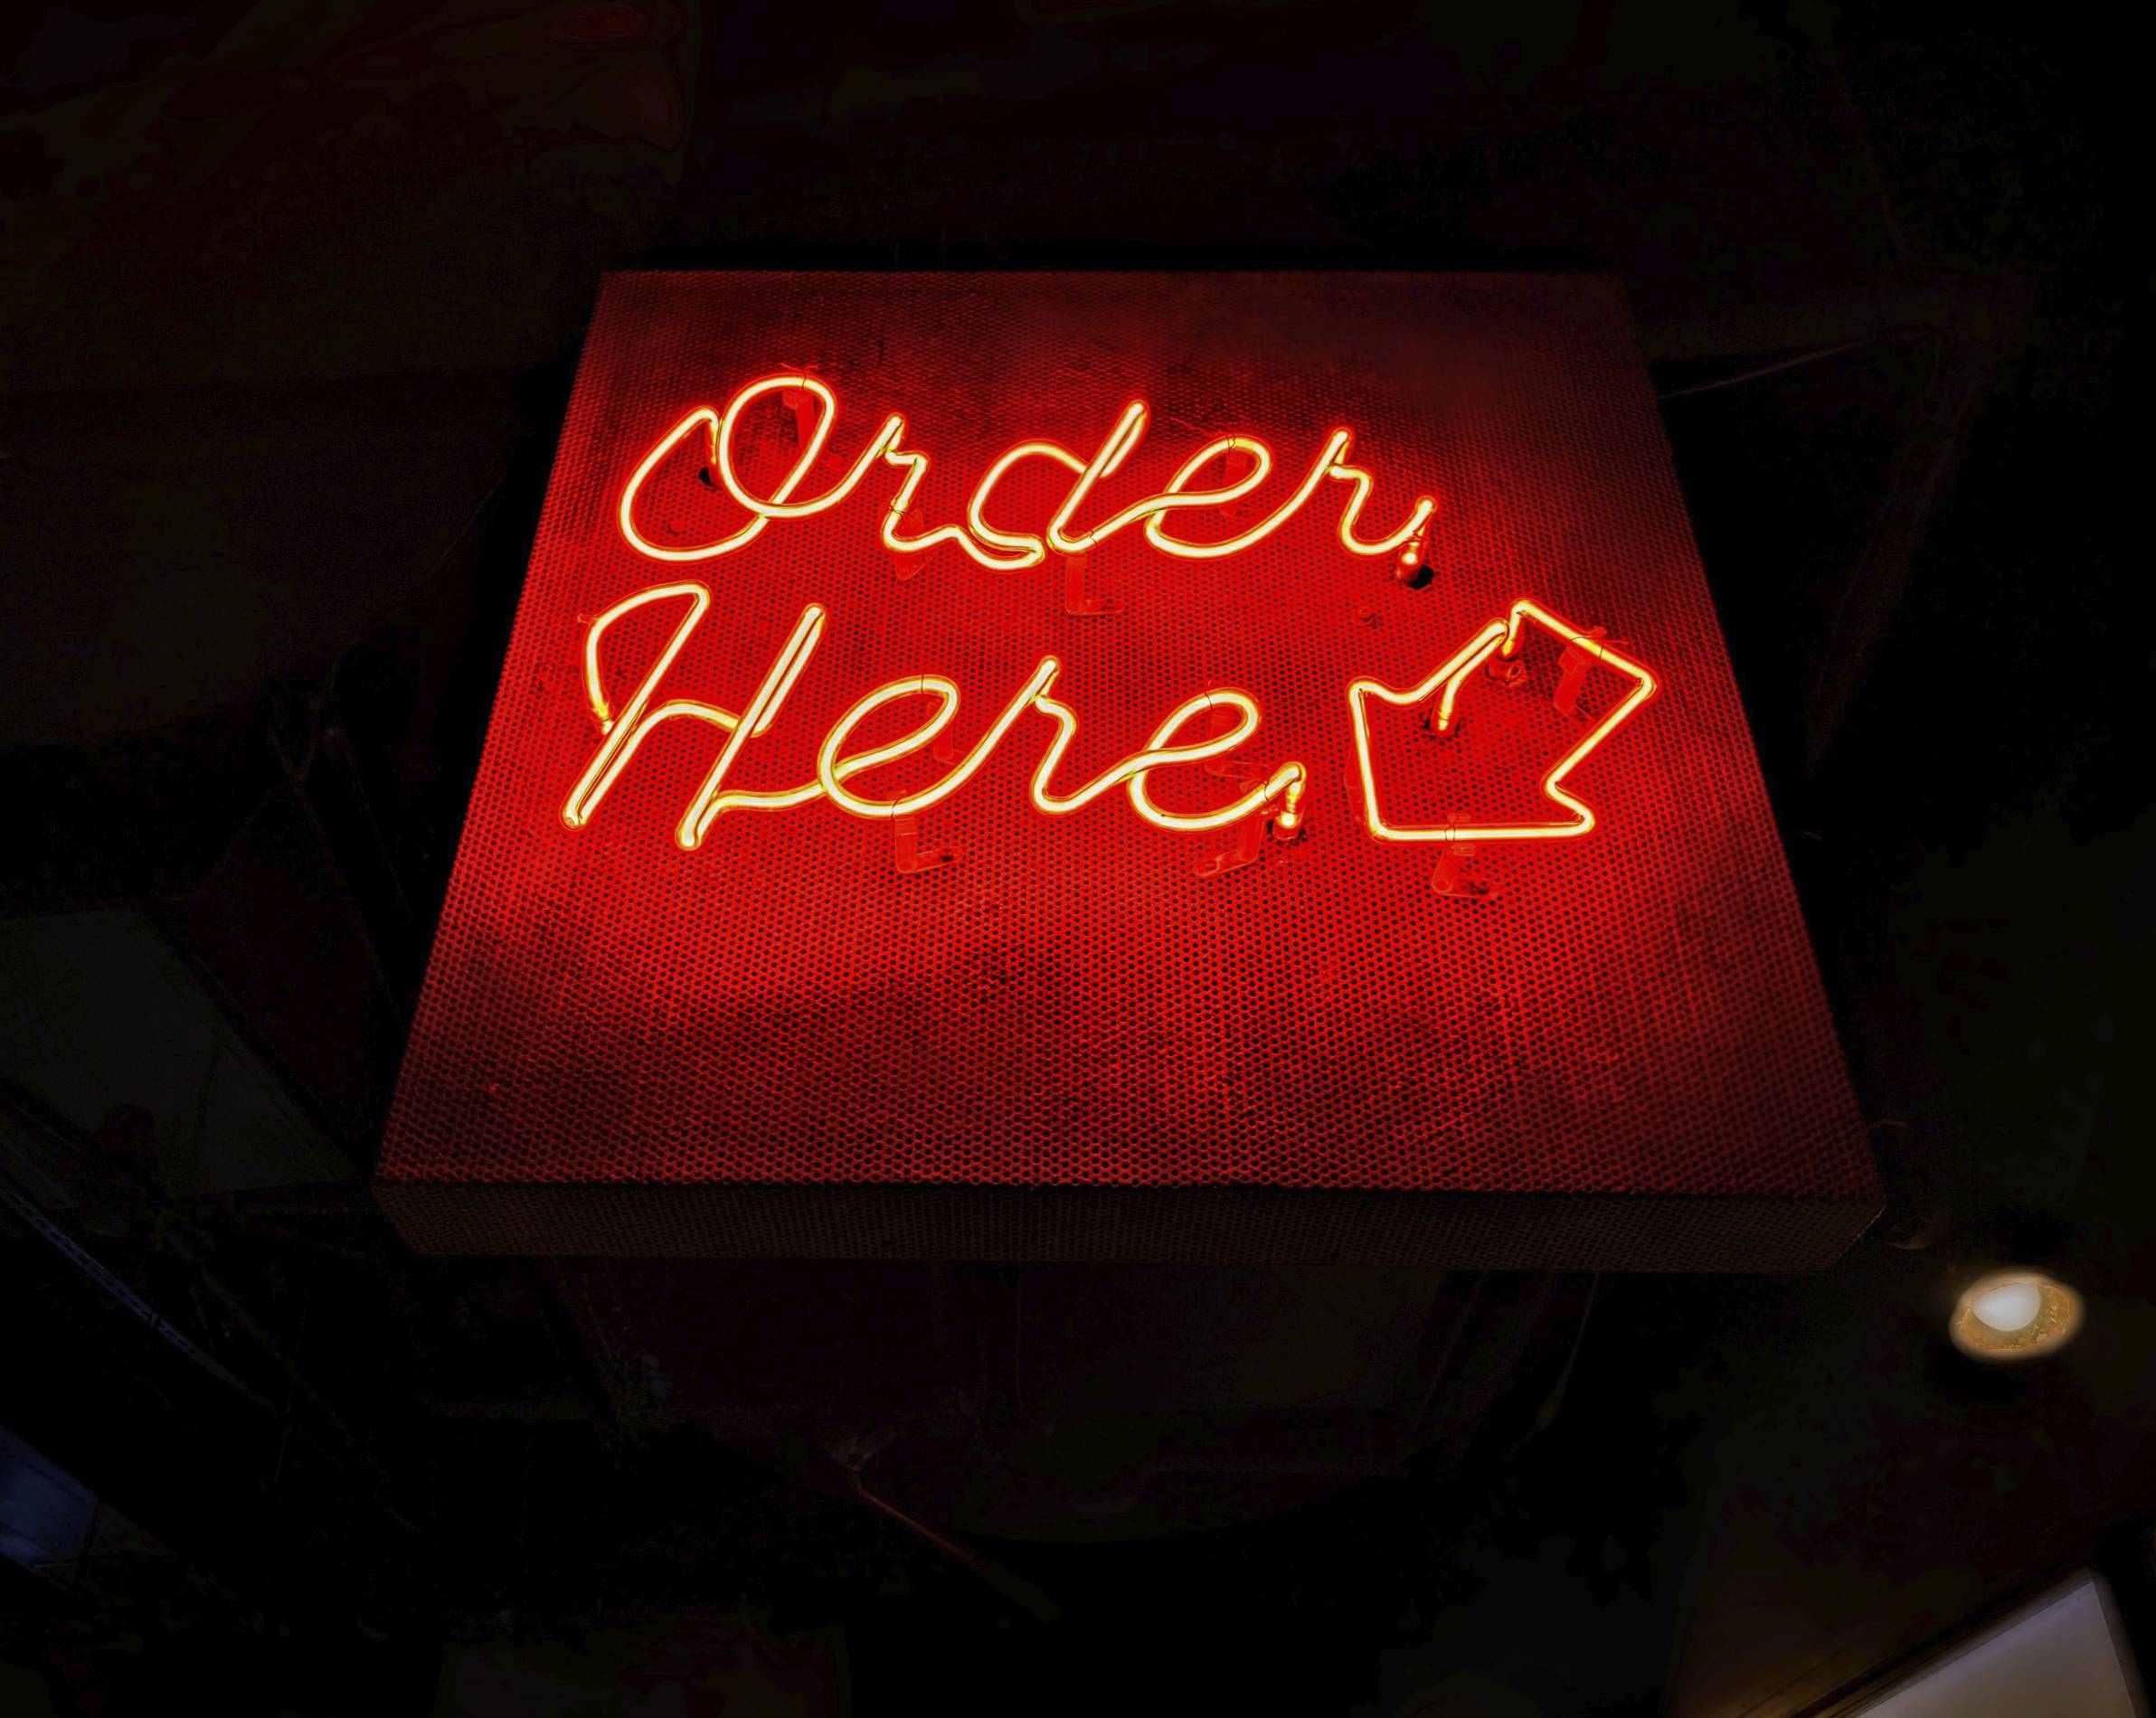 Order here sign